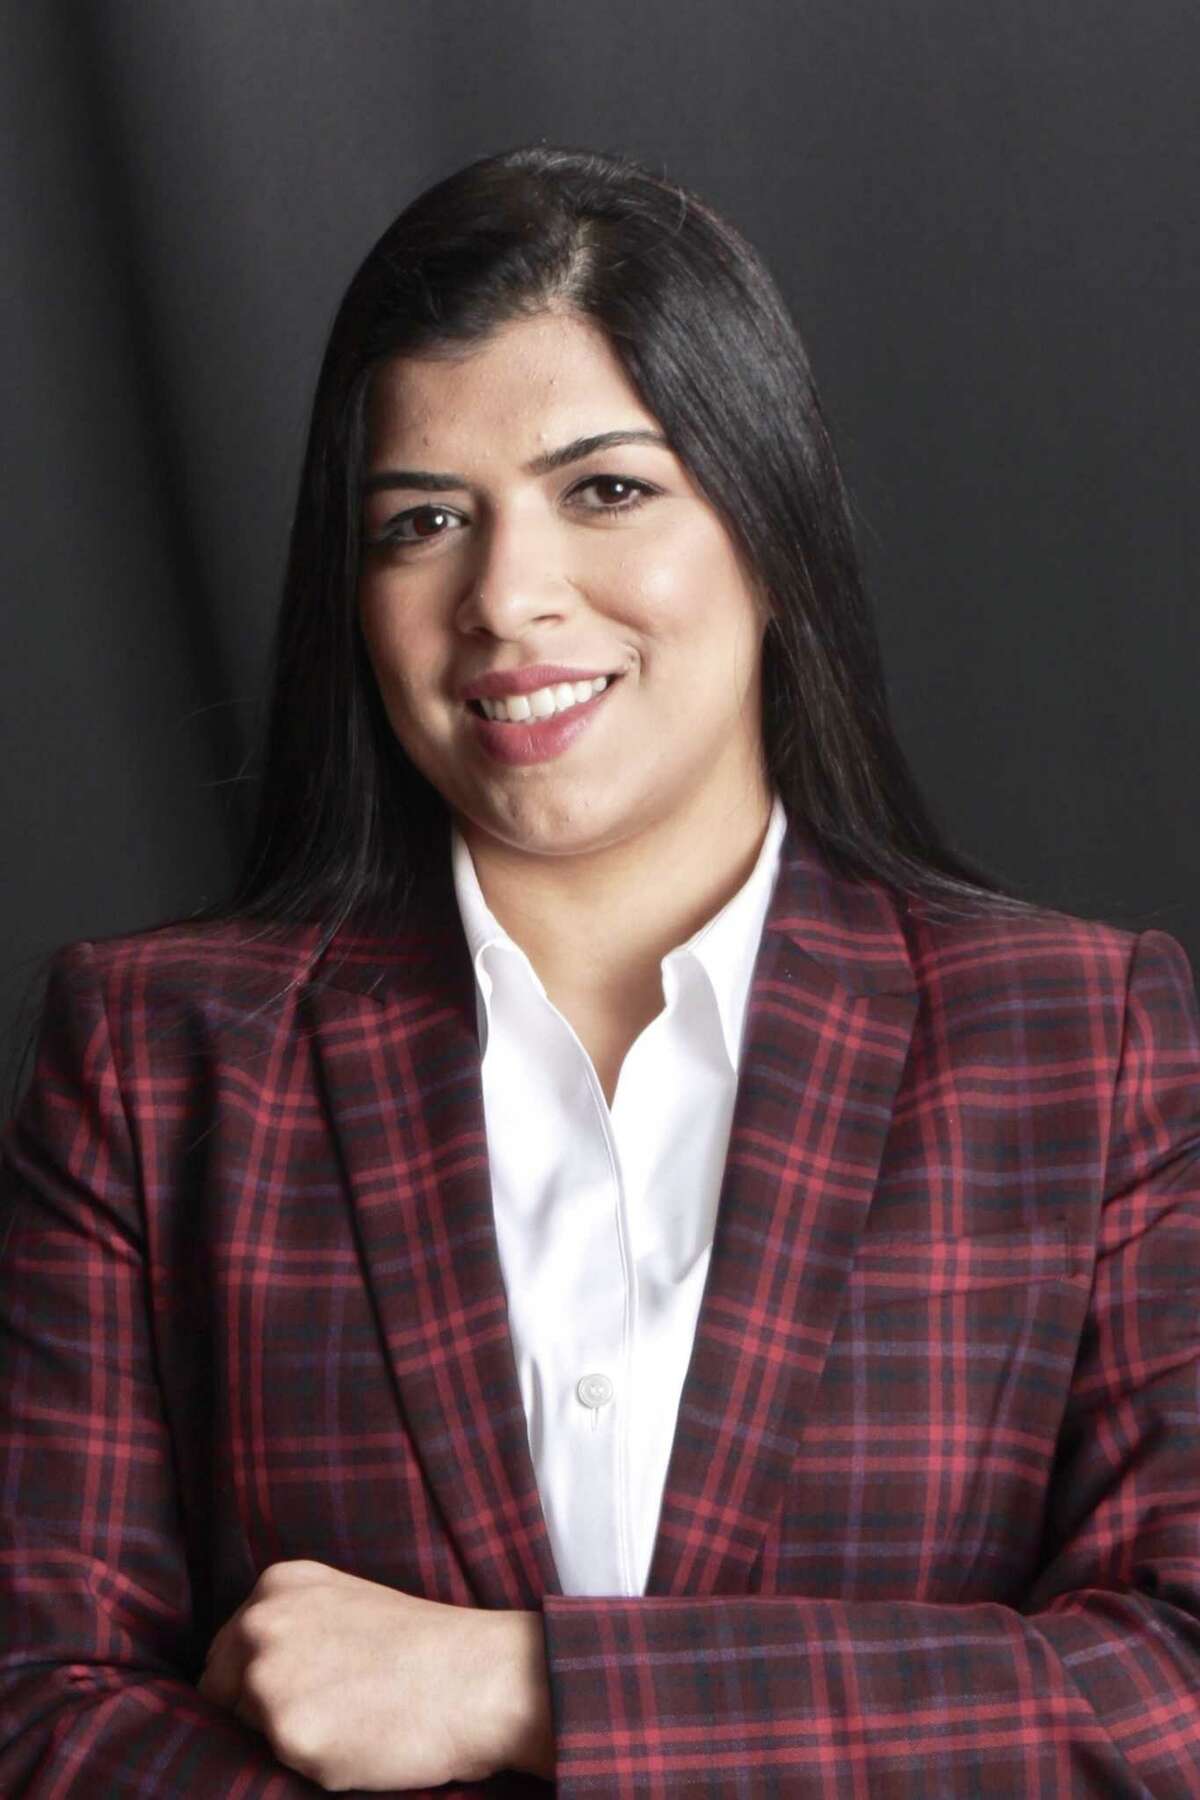 Dr. Sadia A. Durrani has joined OakBend Medical Group.